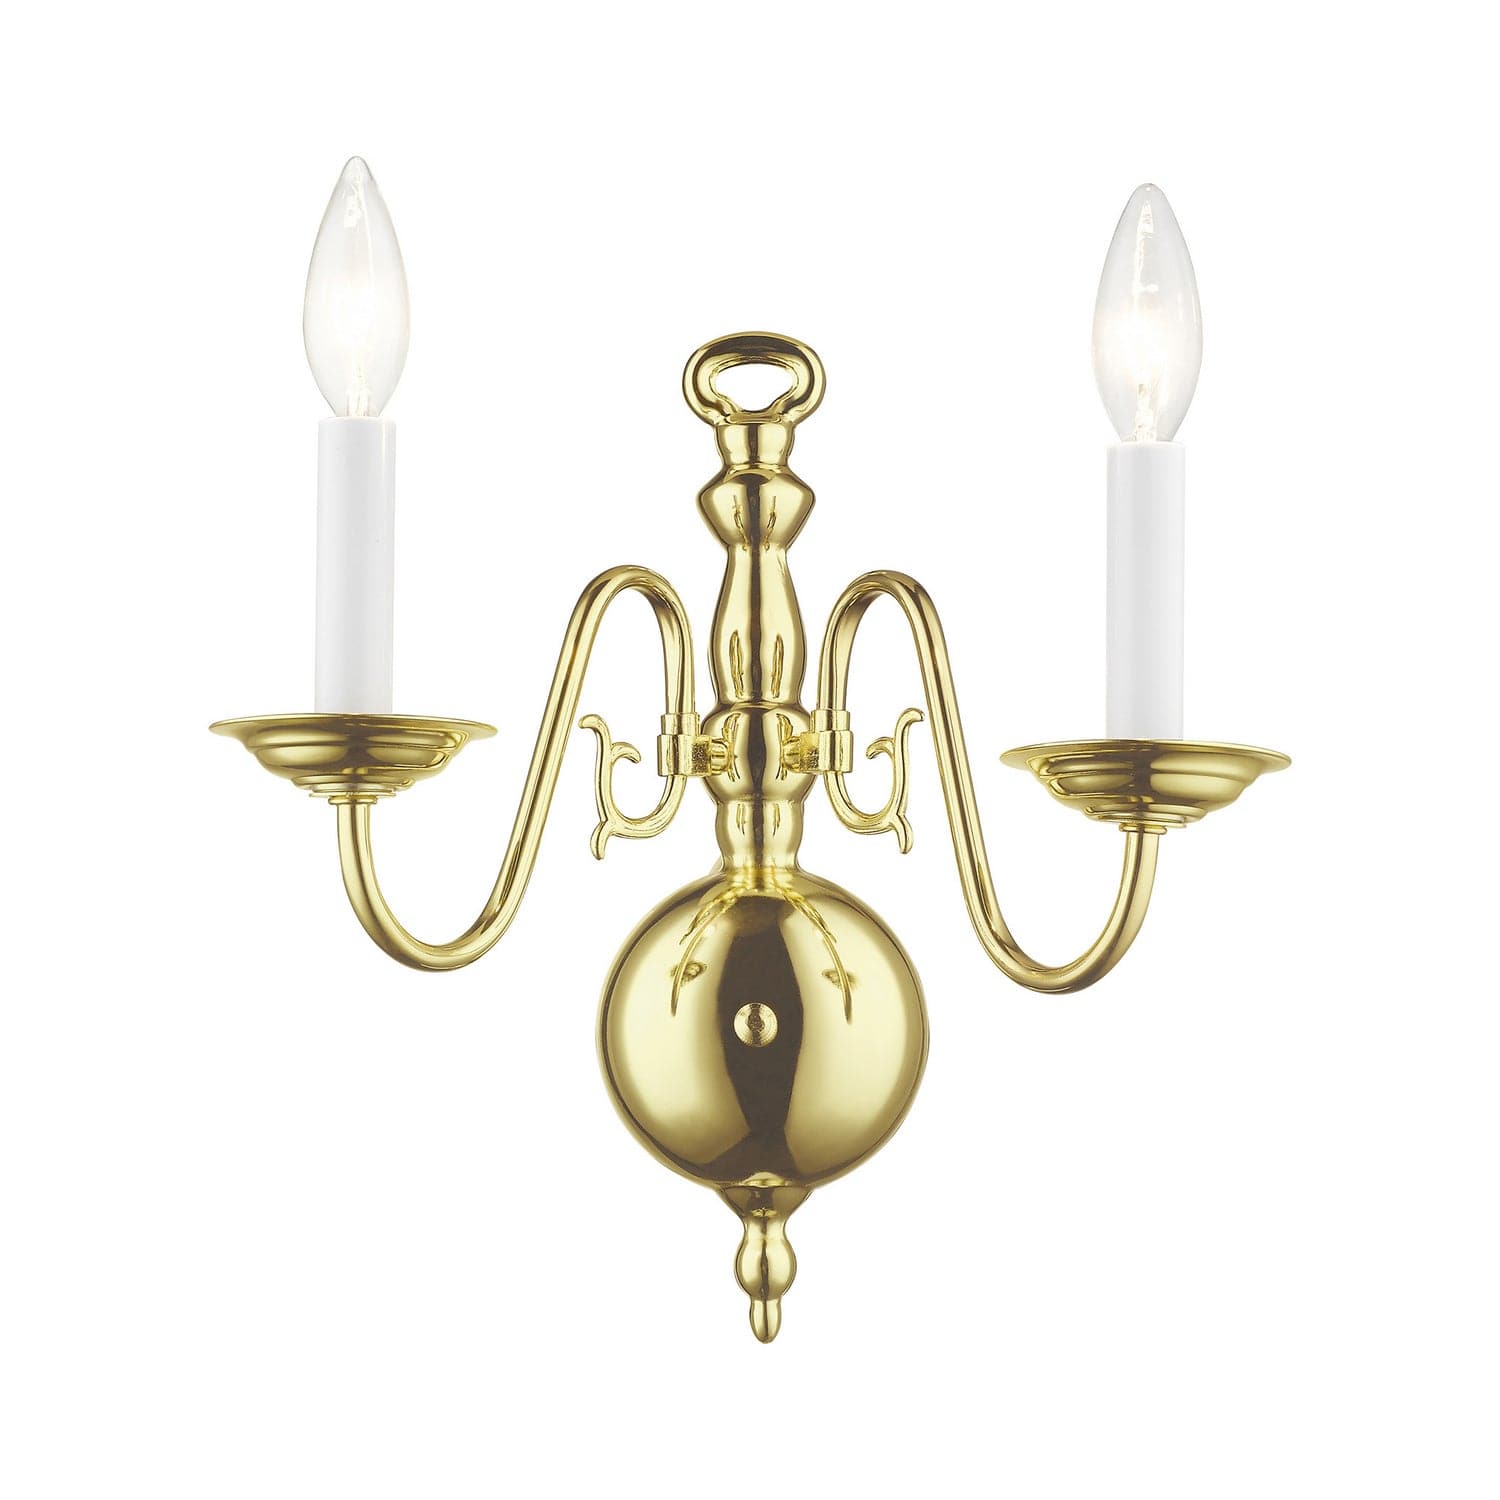 Livex Lighting - 5002-02 - Two Light Wall Sconce - Williamsburgh - Polished Brass